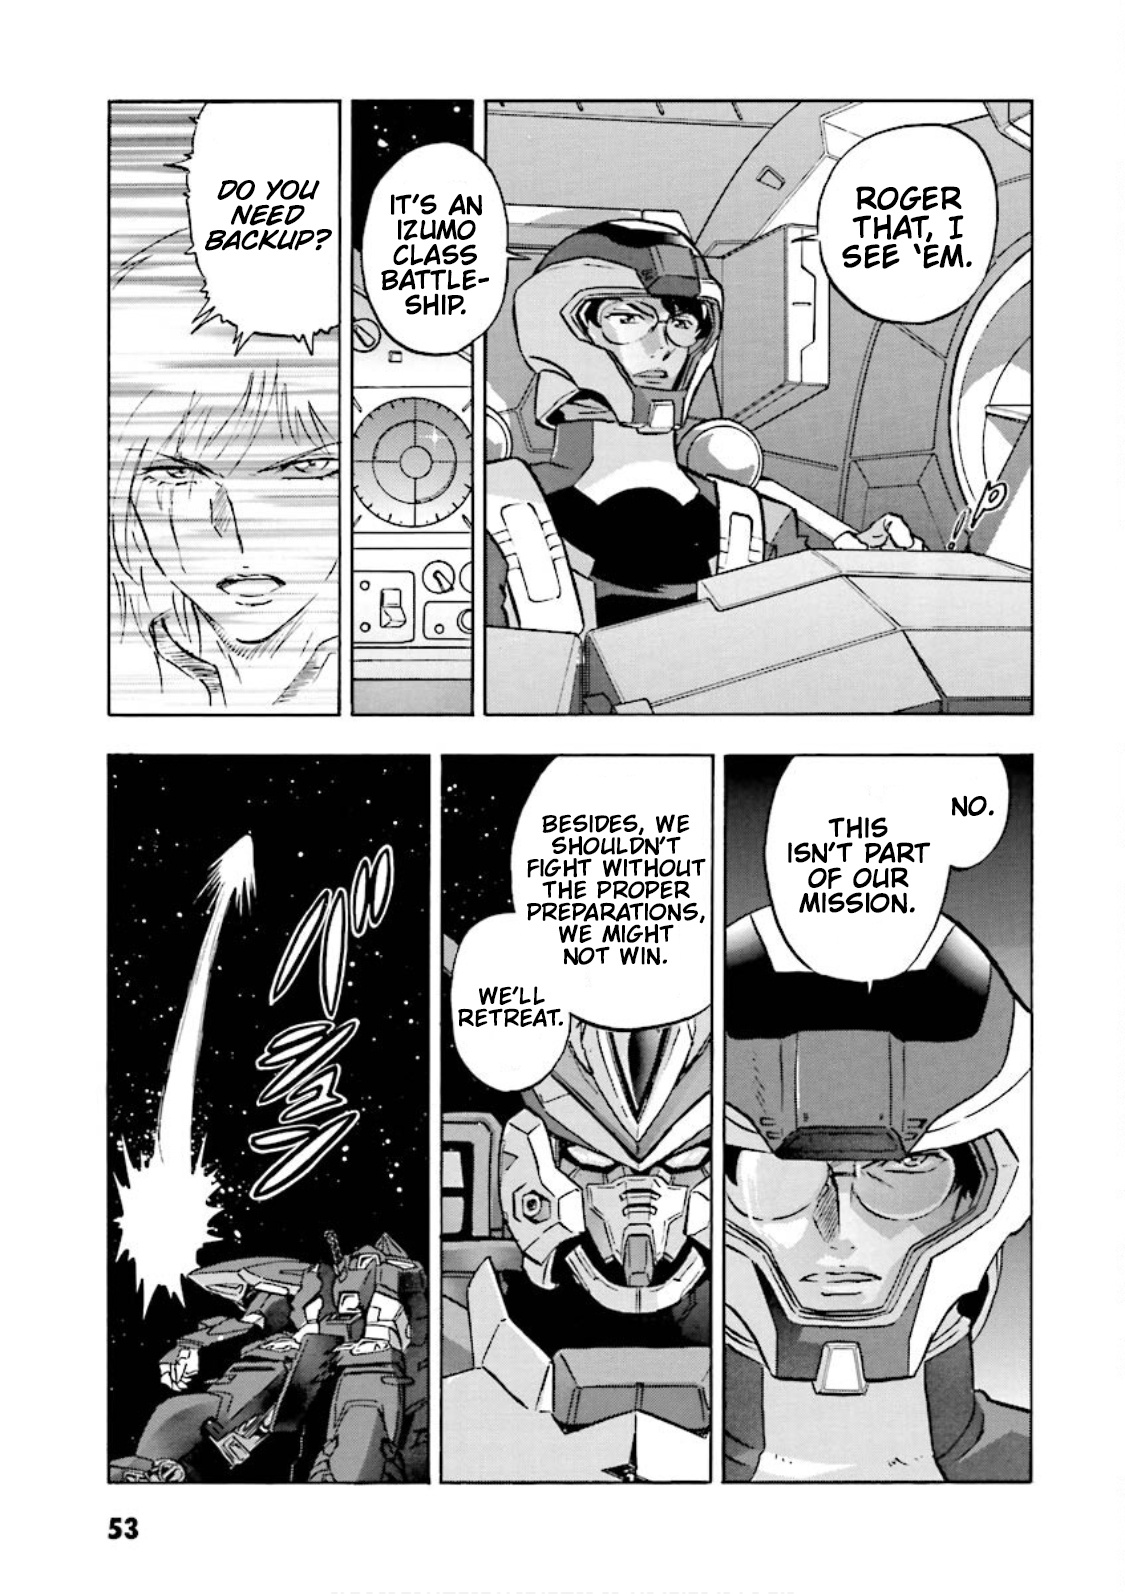 Mobile Suit Gundam Seed Astray Re:master Edition - Page 3